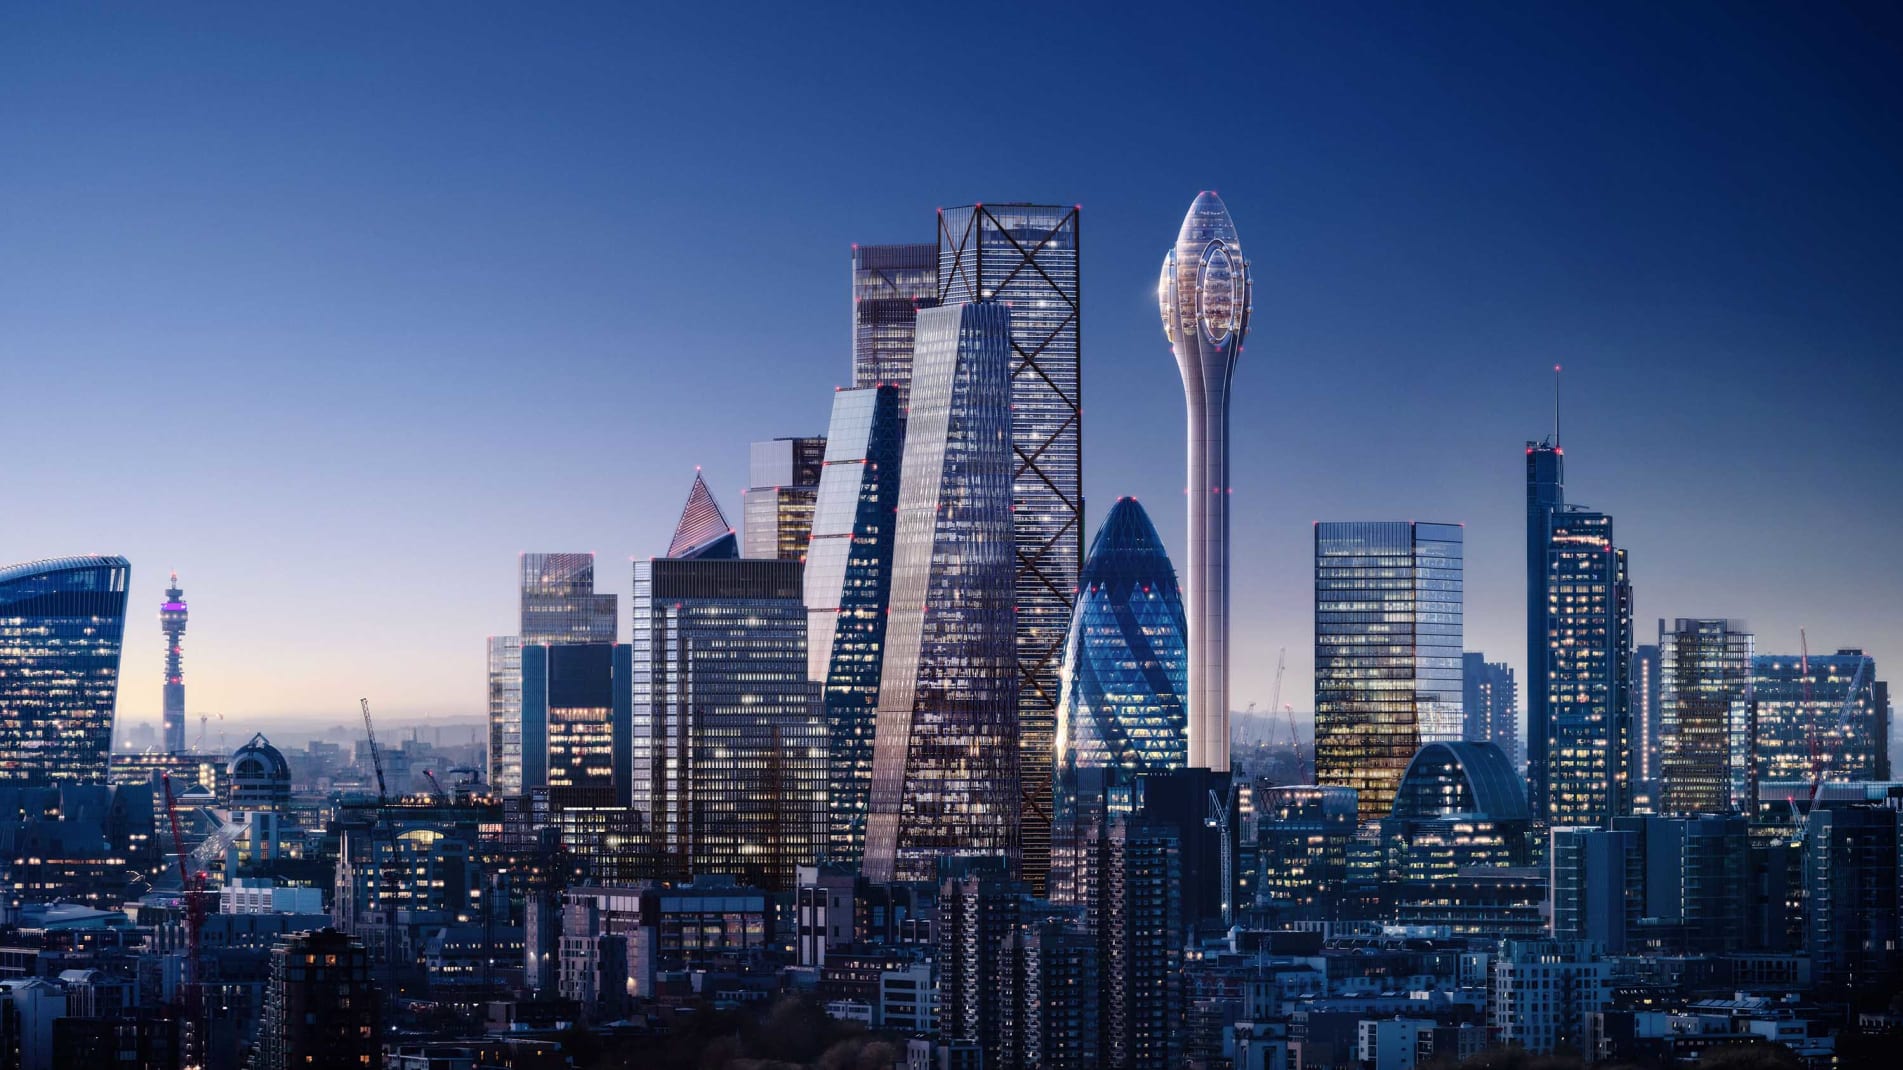 The Tulip will become the tallest building in London's financial district